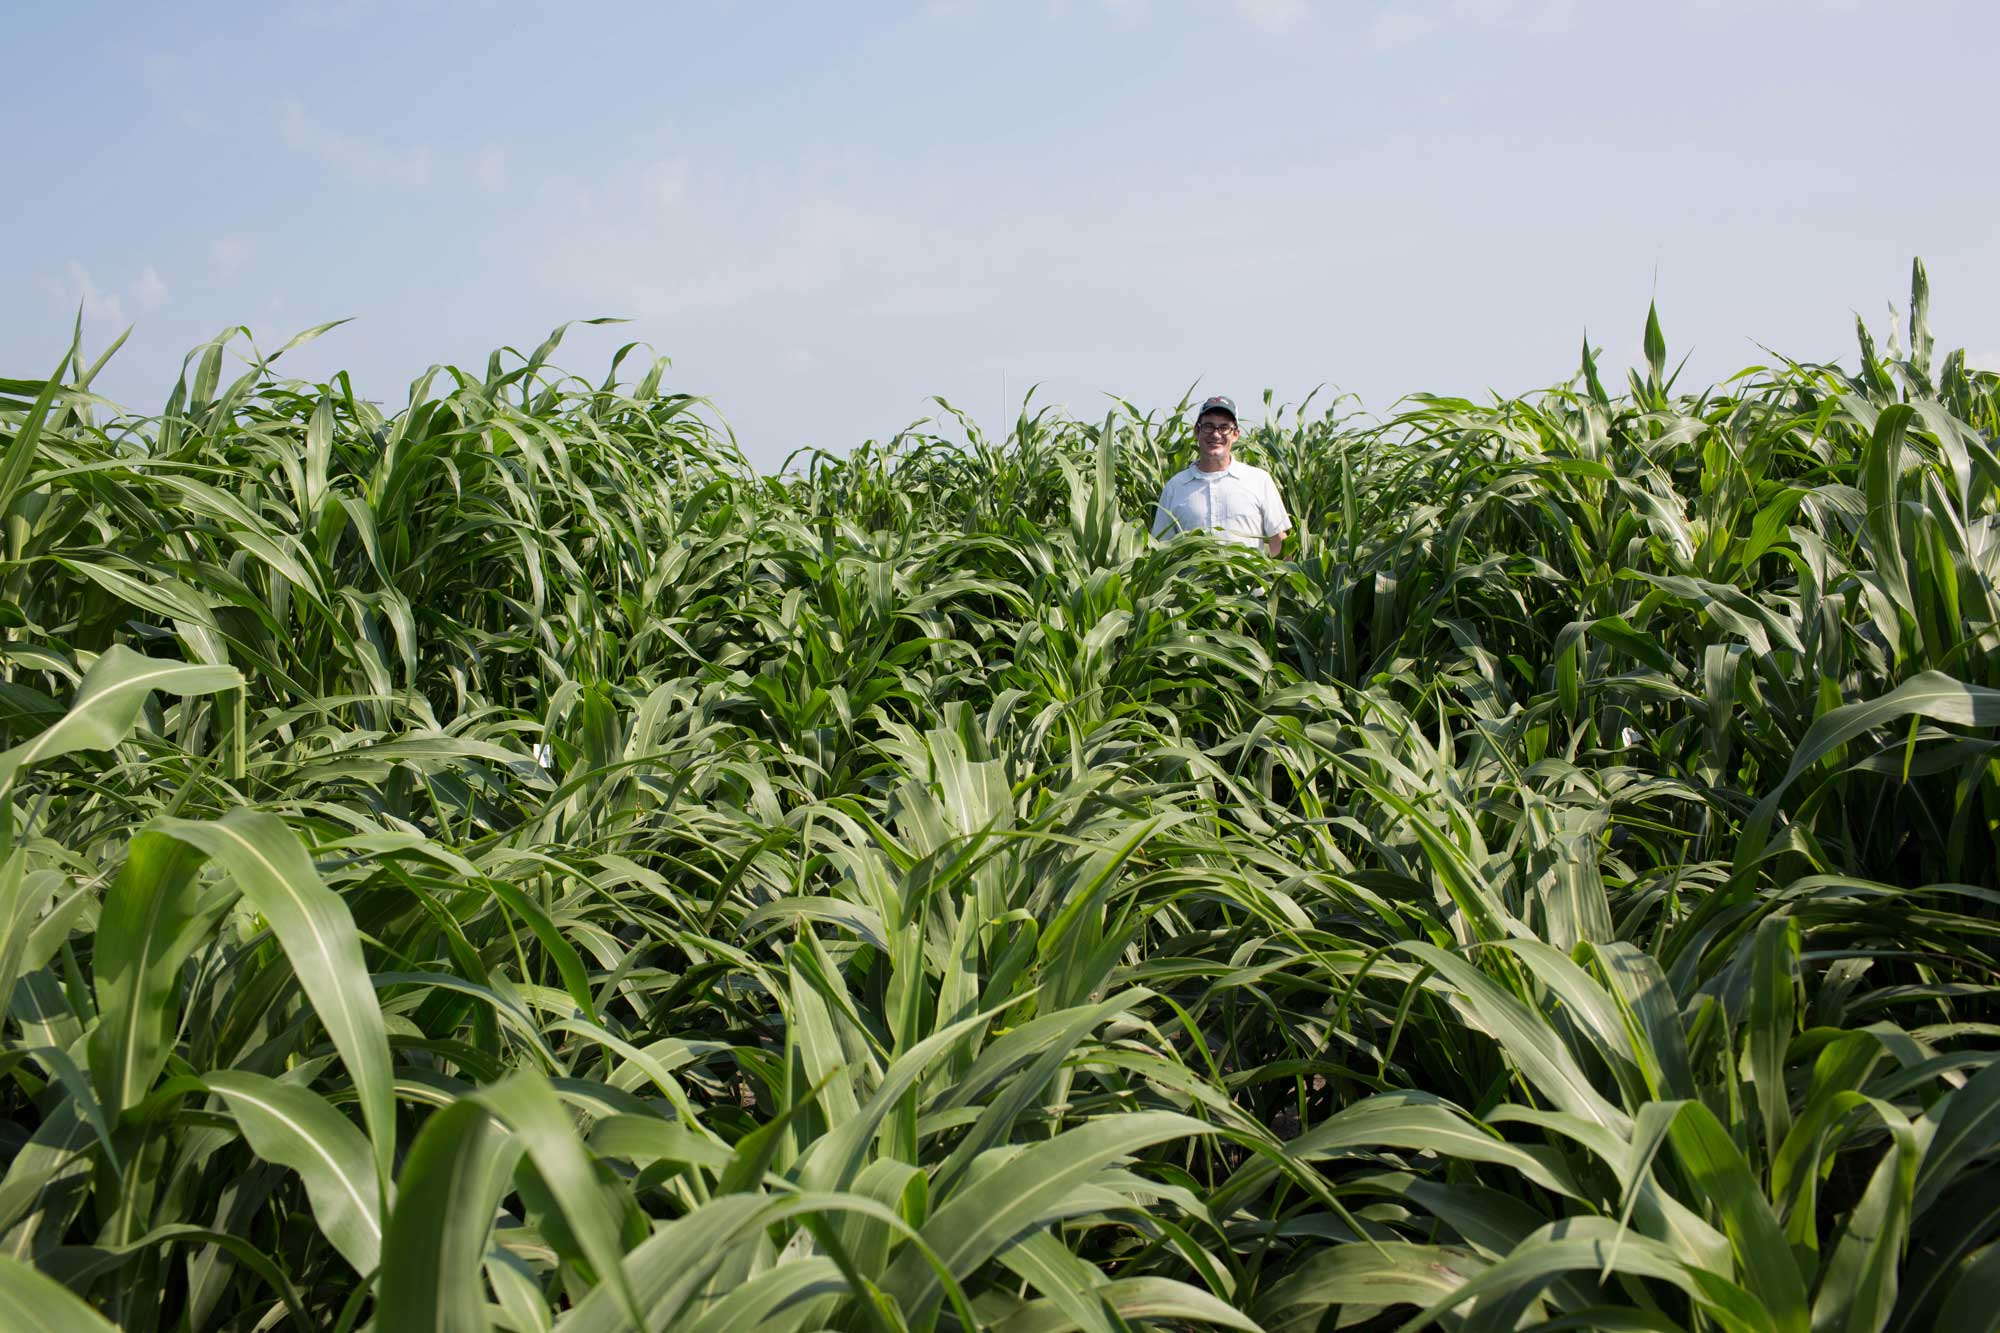 Photograph of a field with older sorghum plants that have not yet produced seed heads growing it it. The plants are nearly as tall as a man standing in the field. The plants in the image are a variety grown for biofuel rather than grain, so they are relatively tall compared to grain varieties.